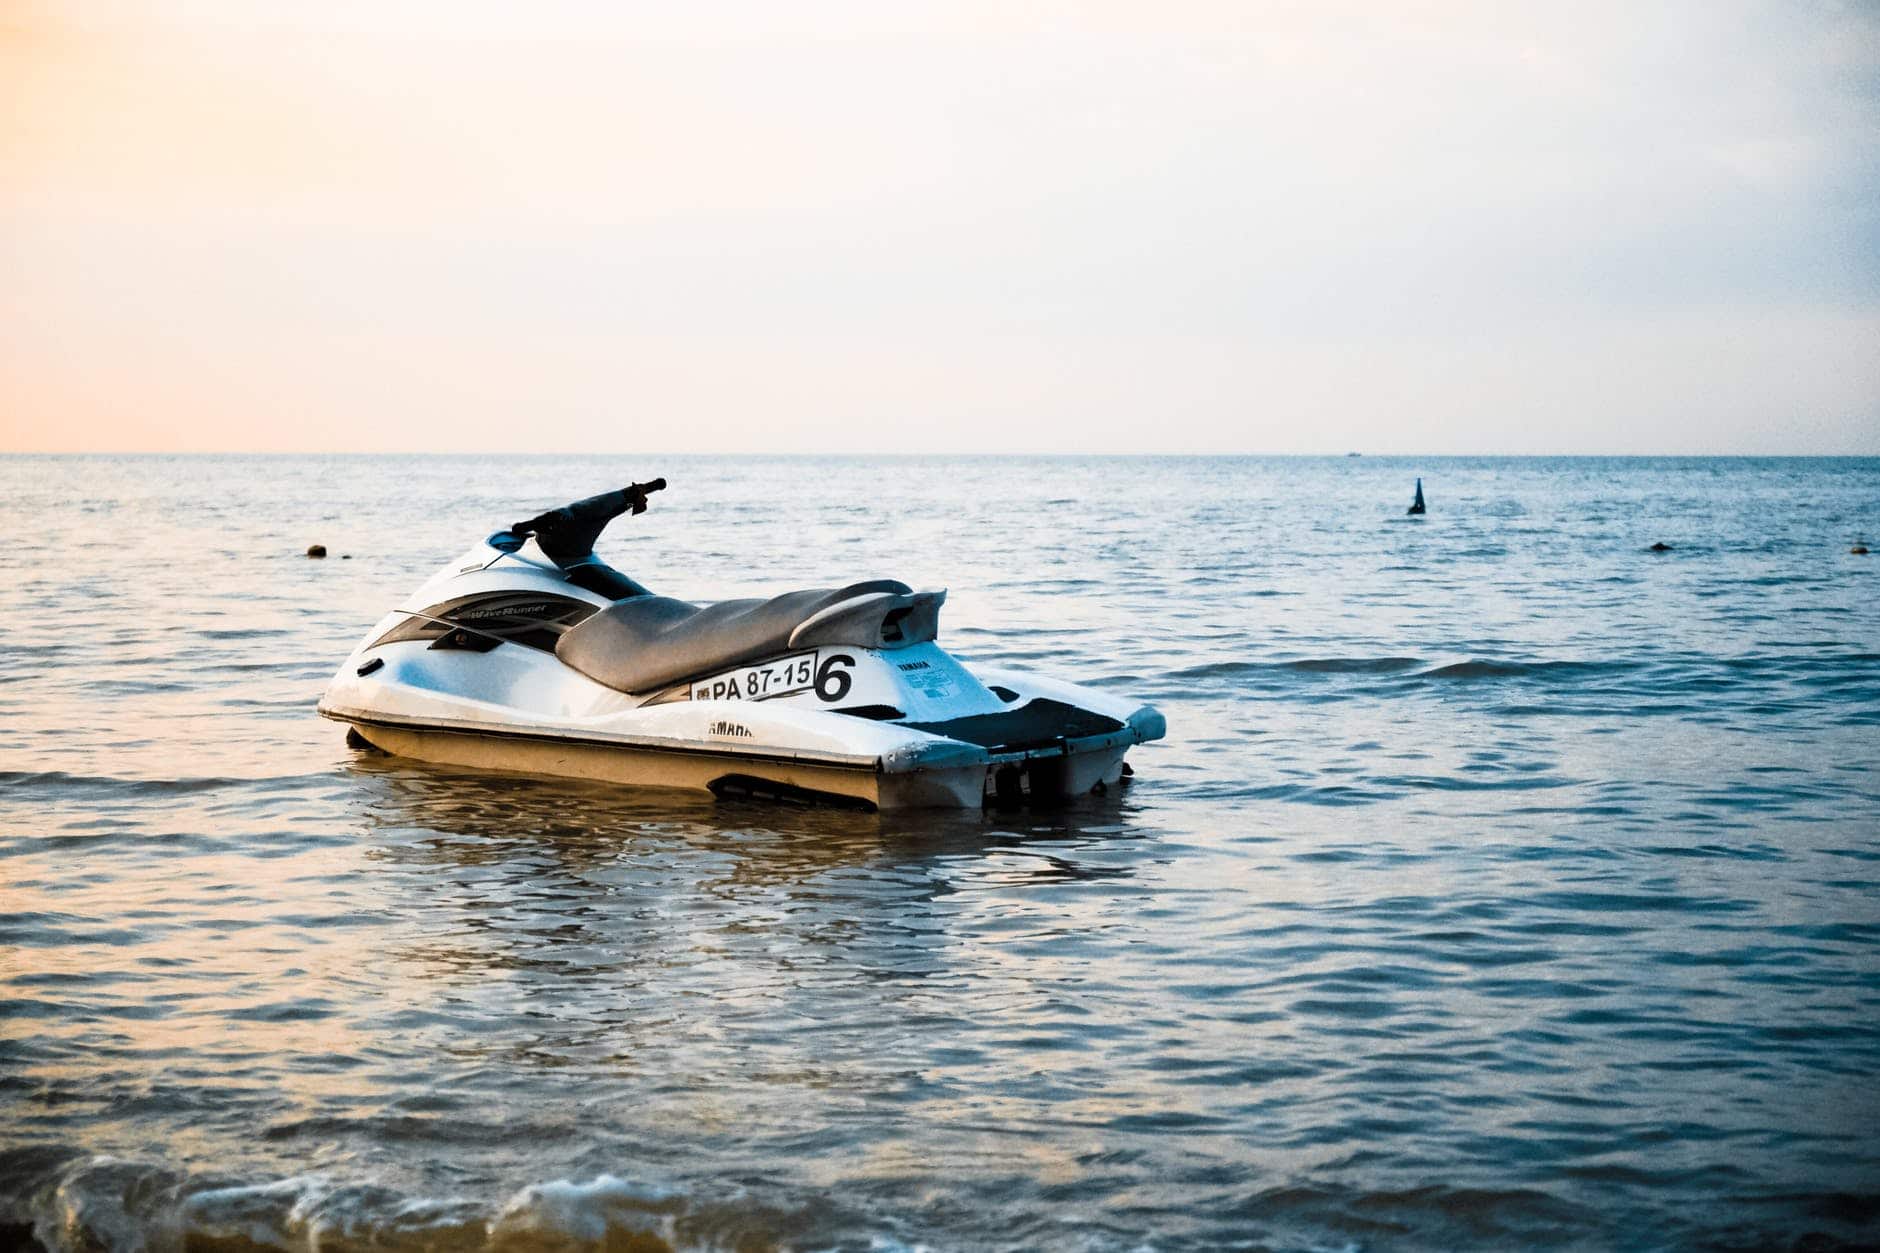 What You Should Know Before Purchasing Used Jet Skis